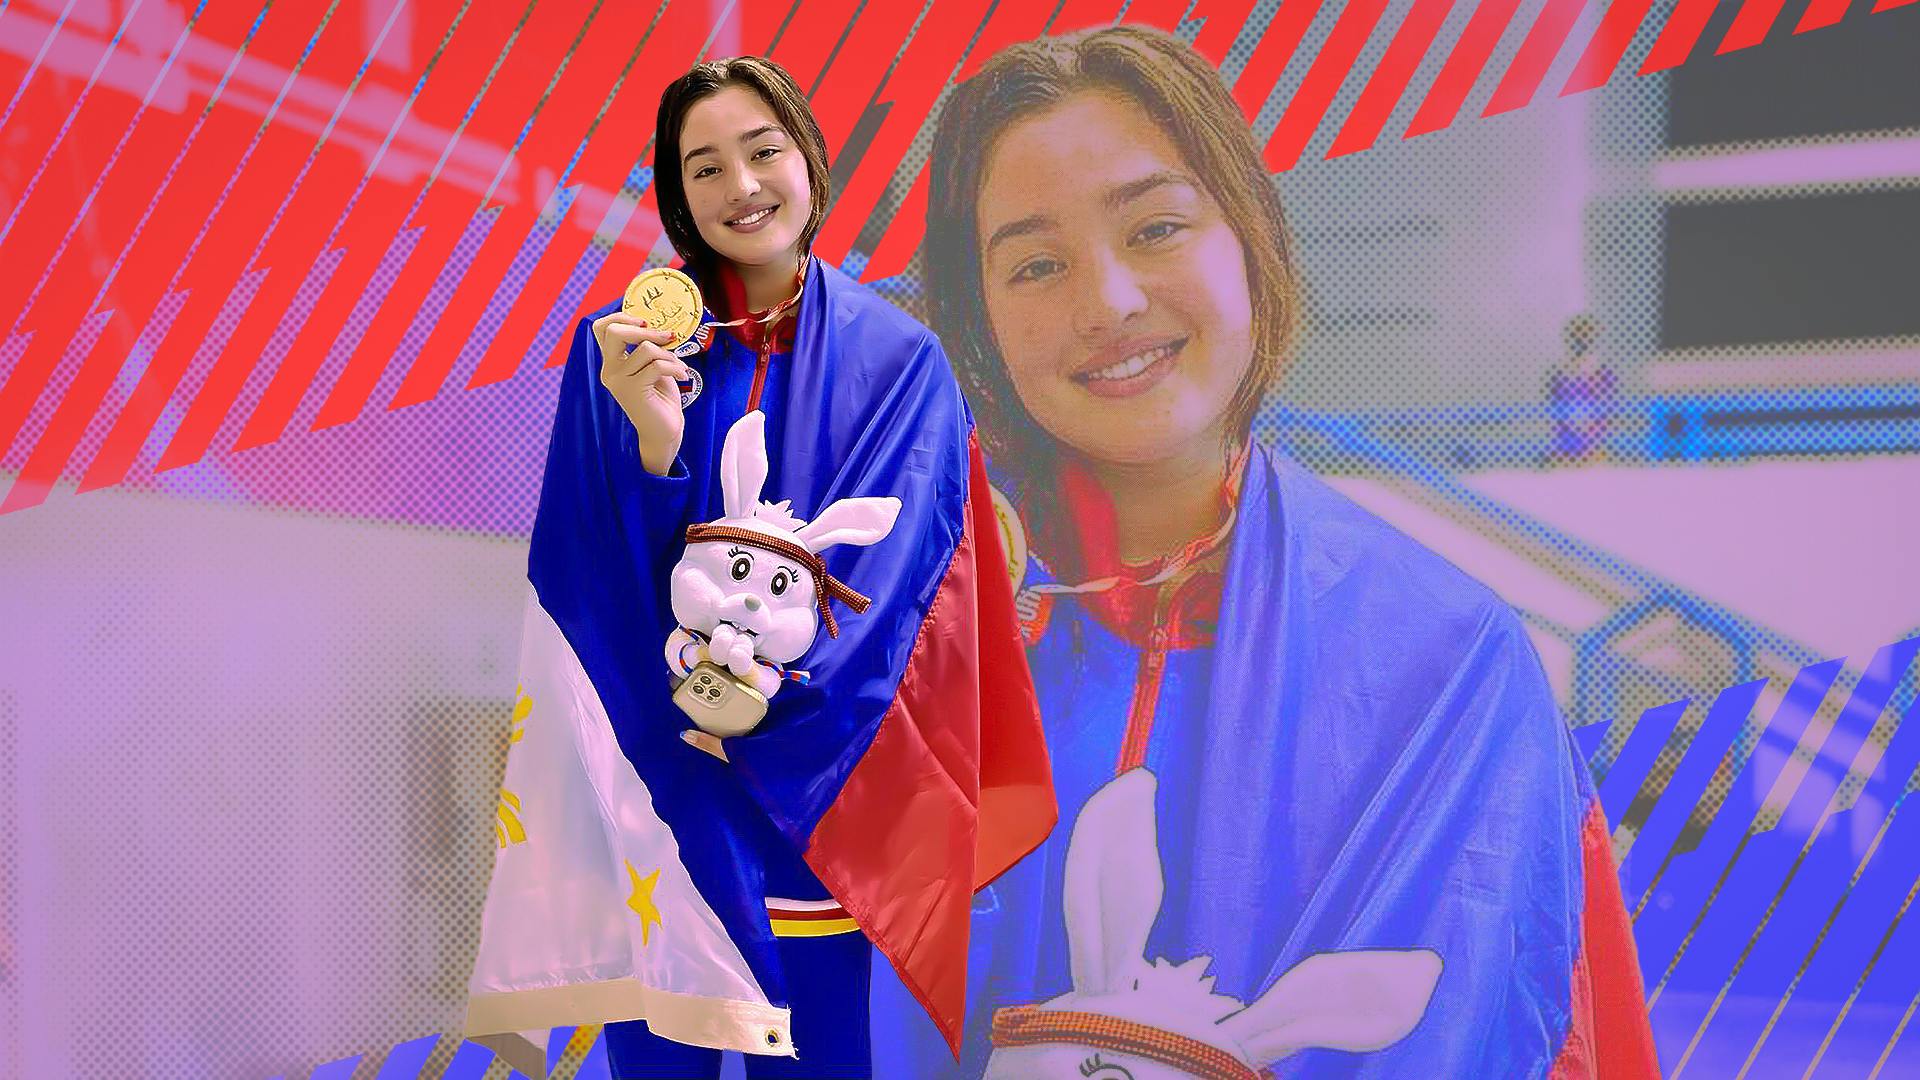 New face of PH swimming? SEA Games gold medalist Teia Salvino is breaking records at 17